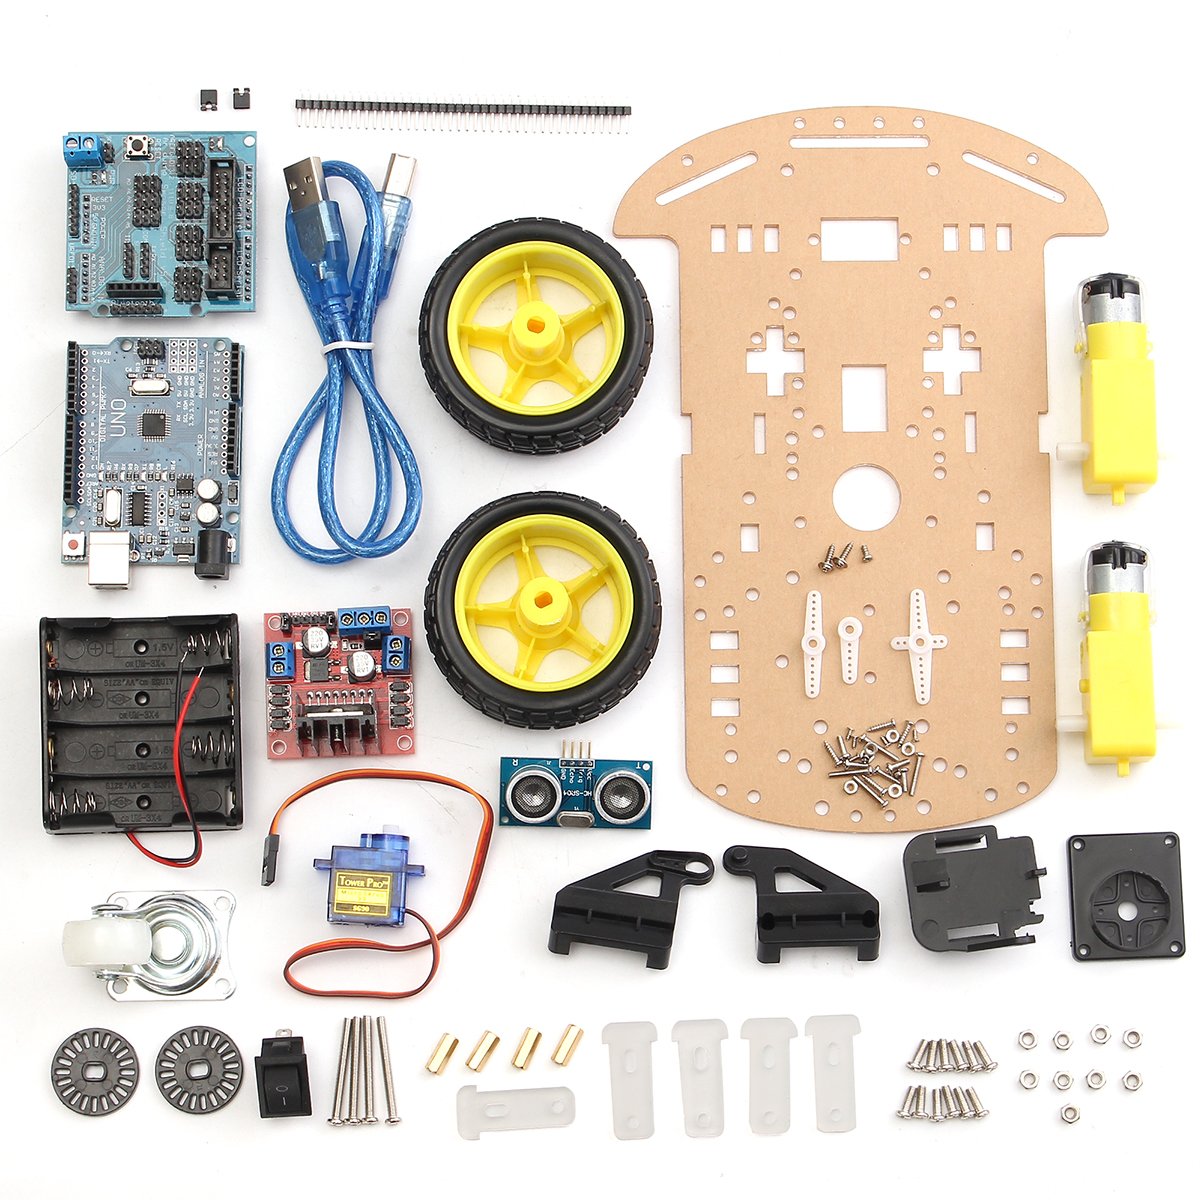 2 Wheels Ultrasonic Smart Robot Car Chassis Tracking Car Kit For Arduino 2